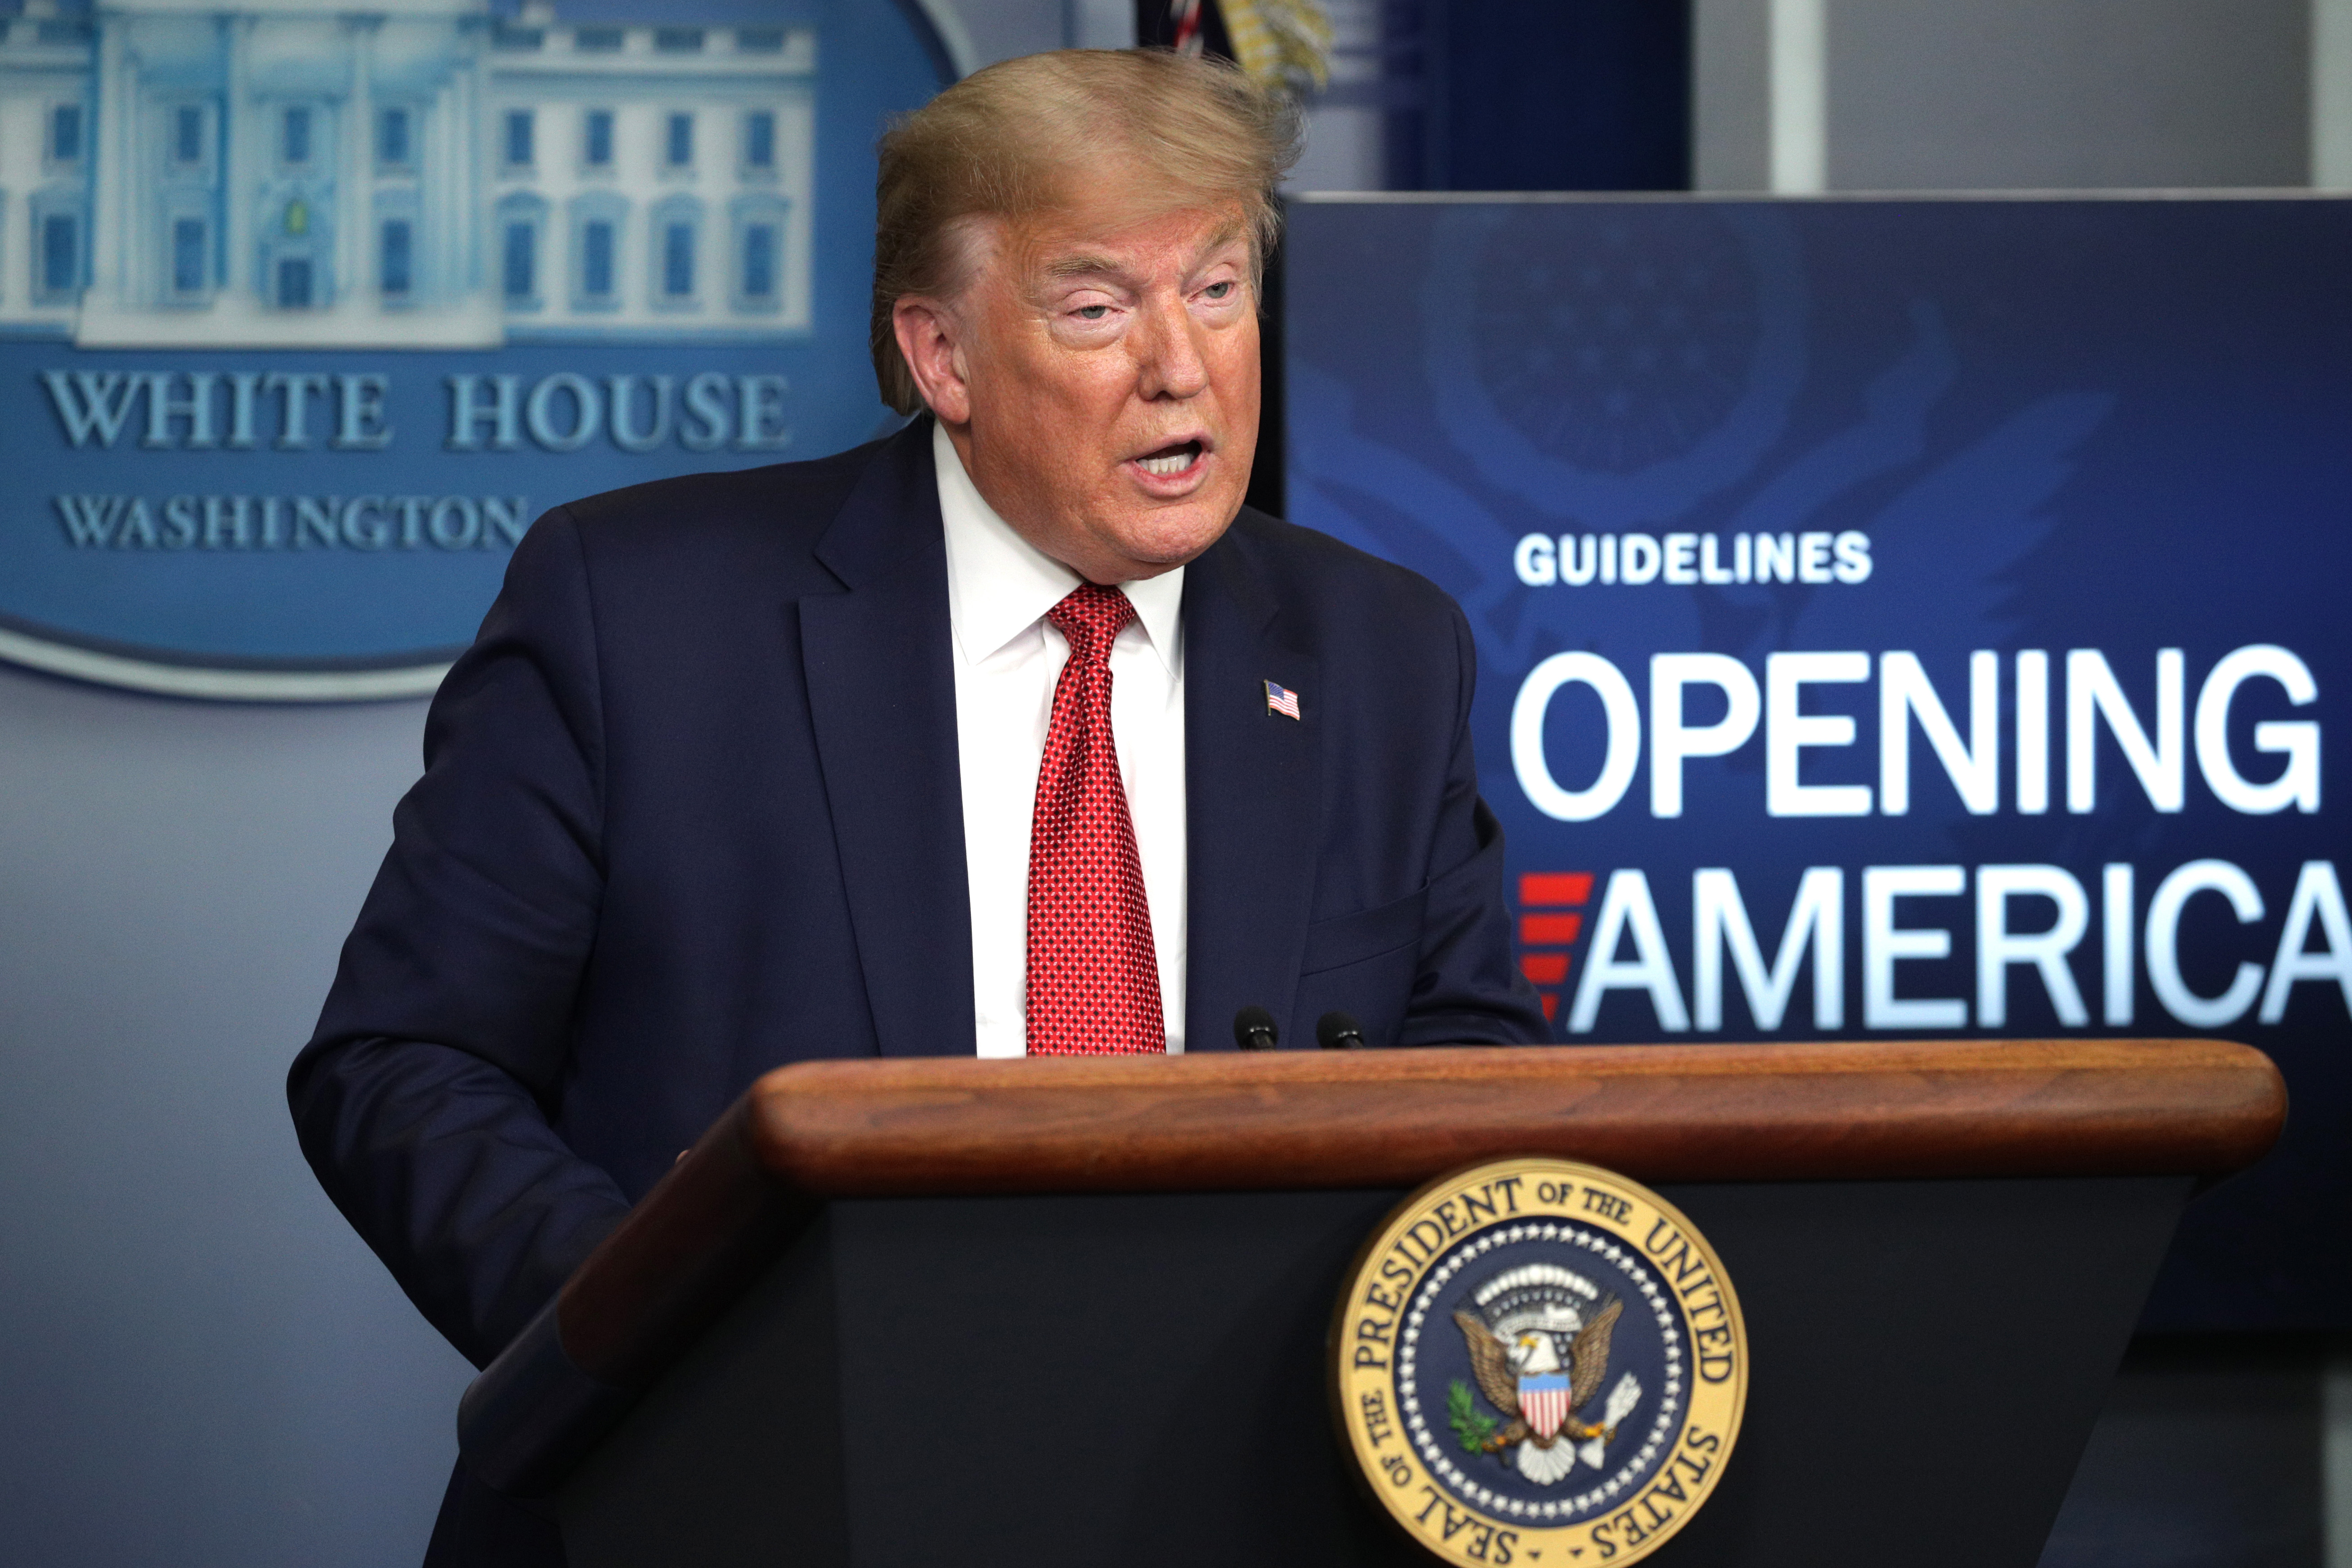 U.S. President Donald Trump speaks during the daily briefing of the White House Coronavirus Task Force in the briefing room at the White House April 16, 2020 in Washington, DC. (Alex Wong/Getty Images)